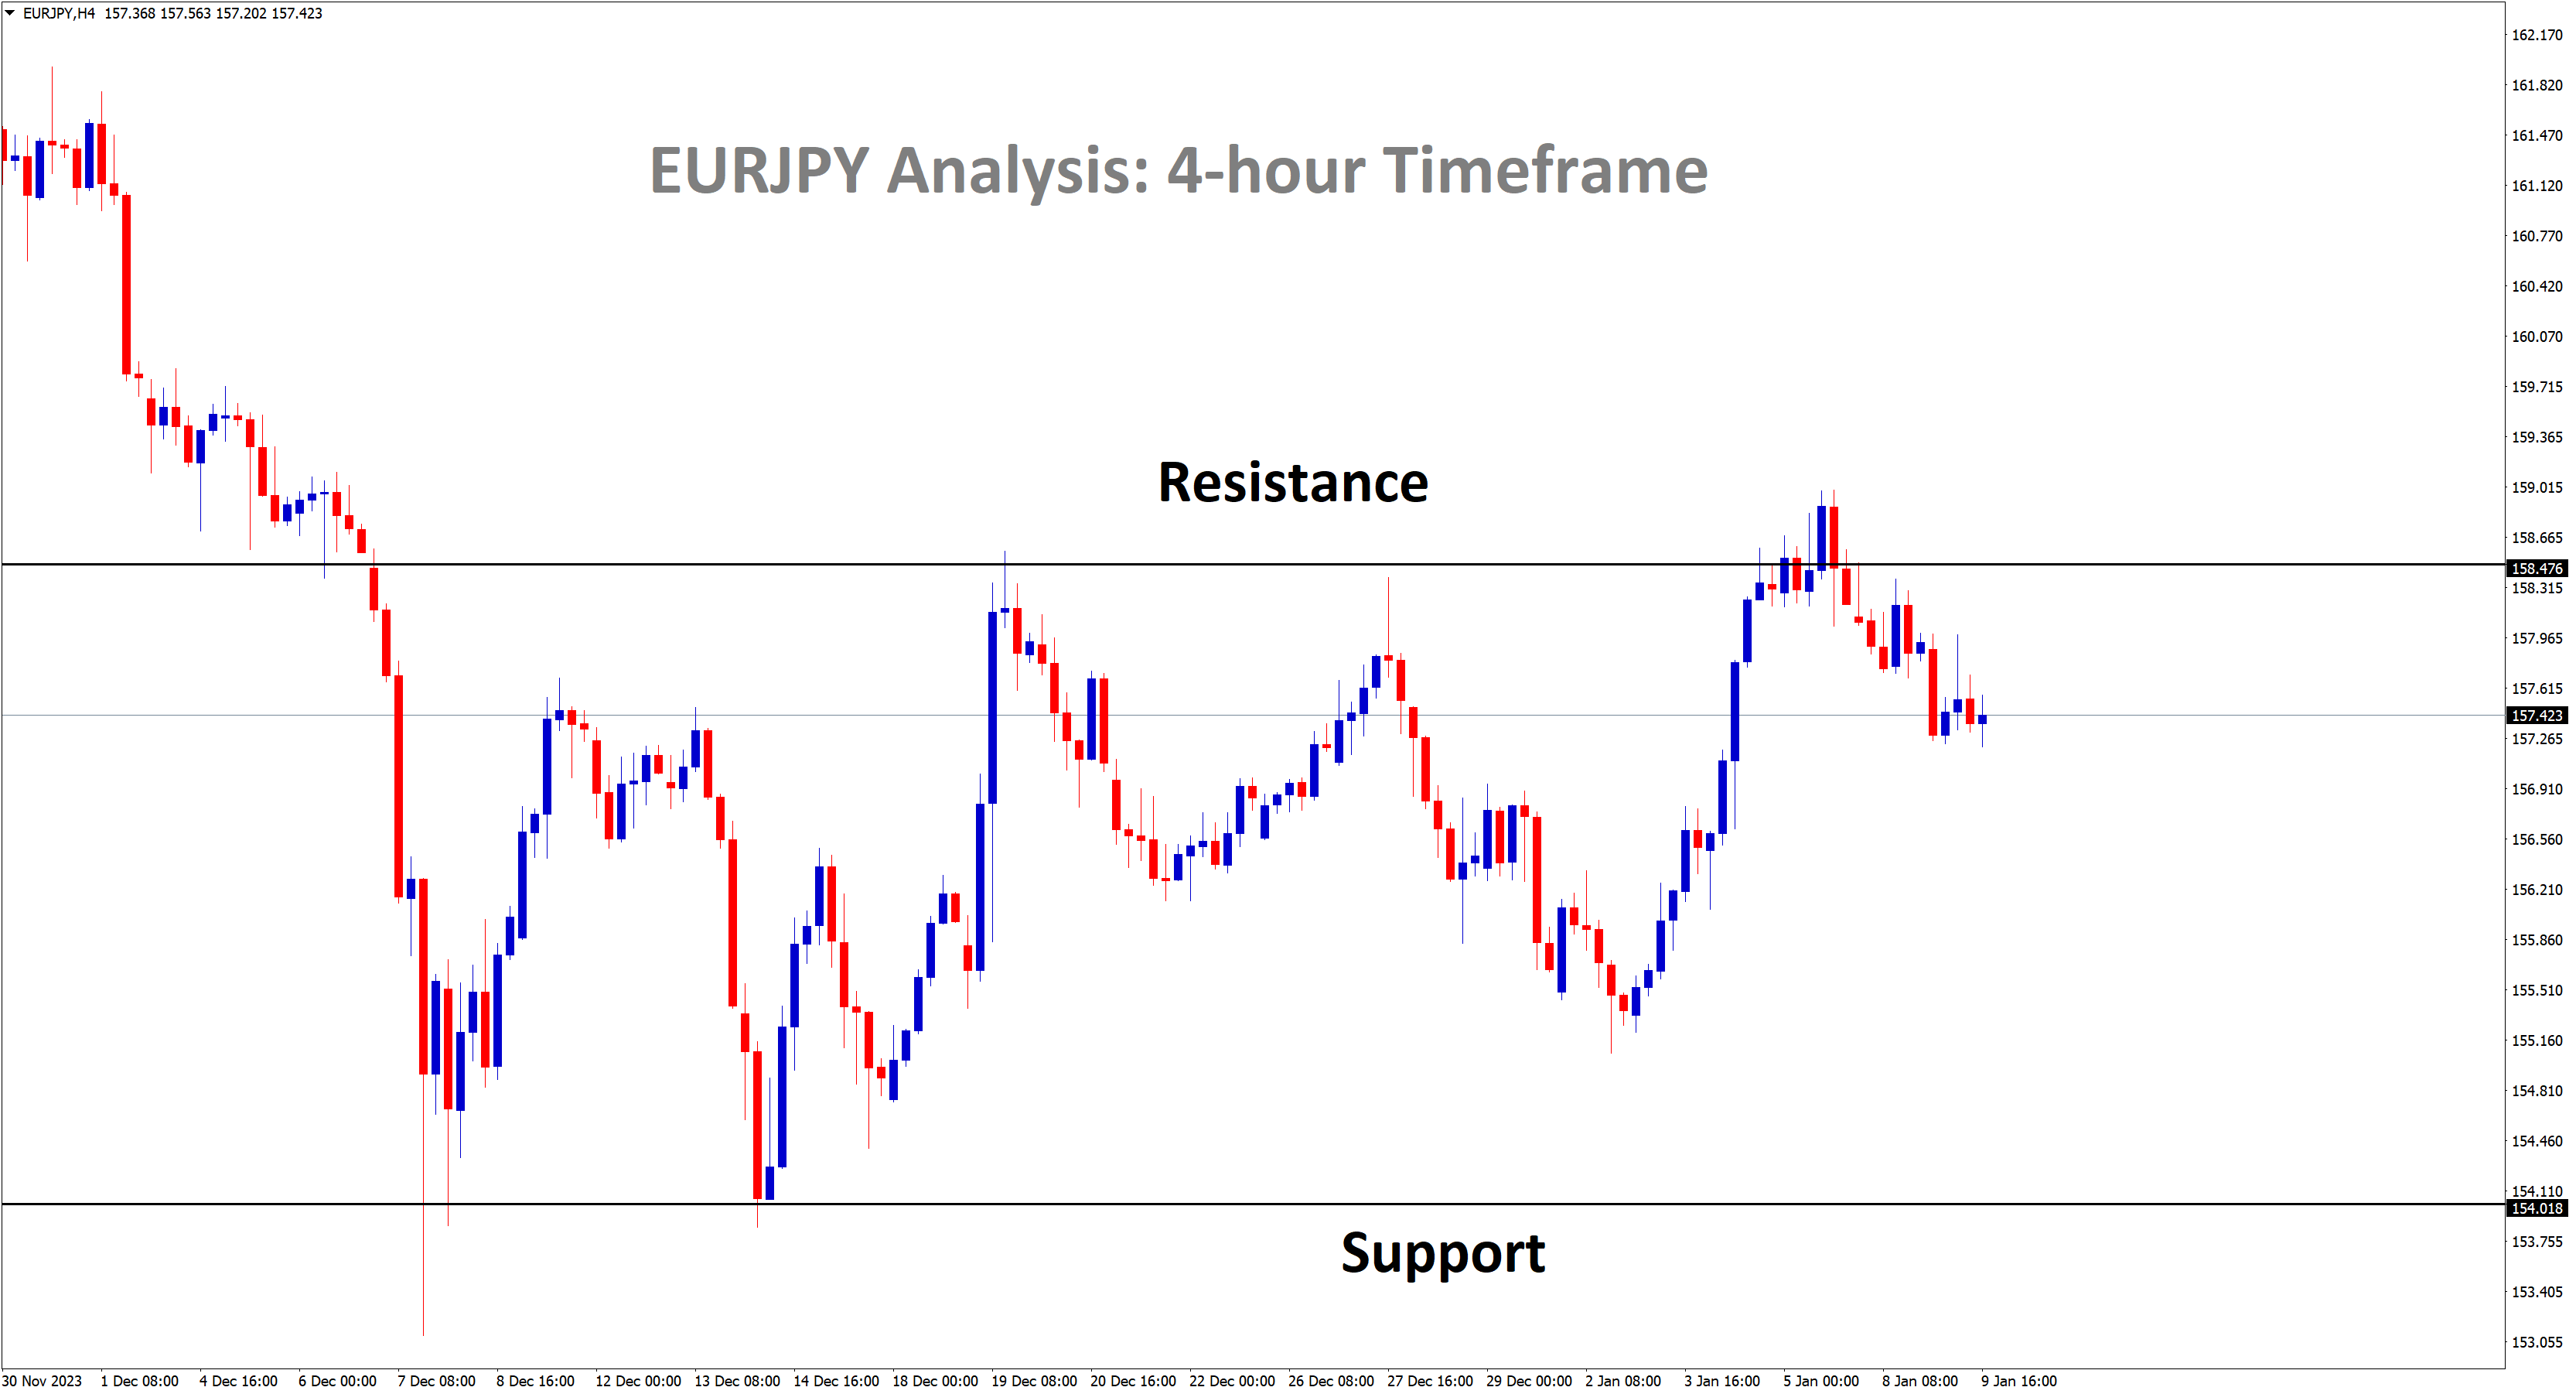 eurjpy falling from resistance